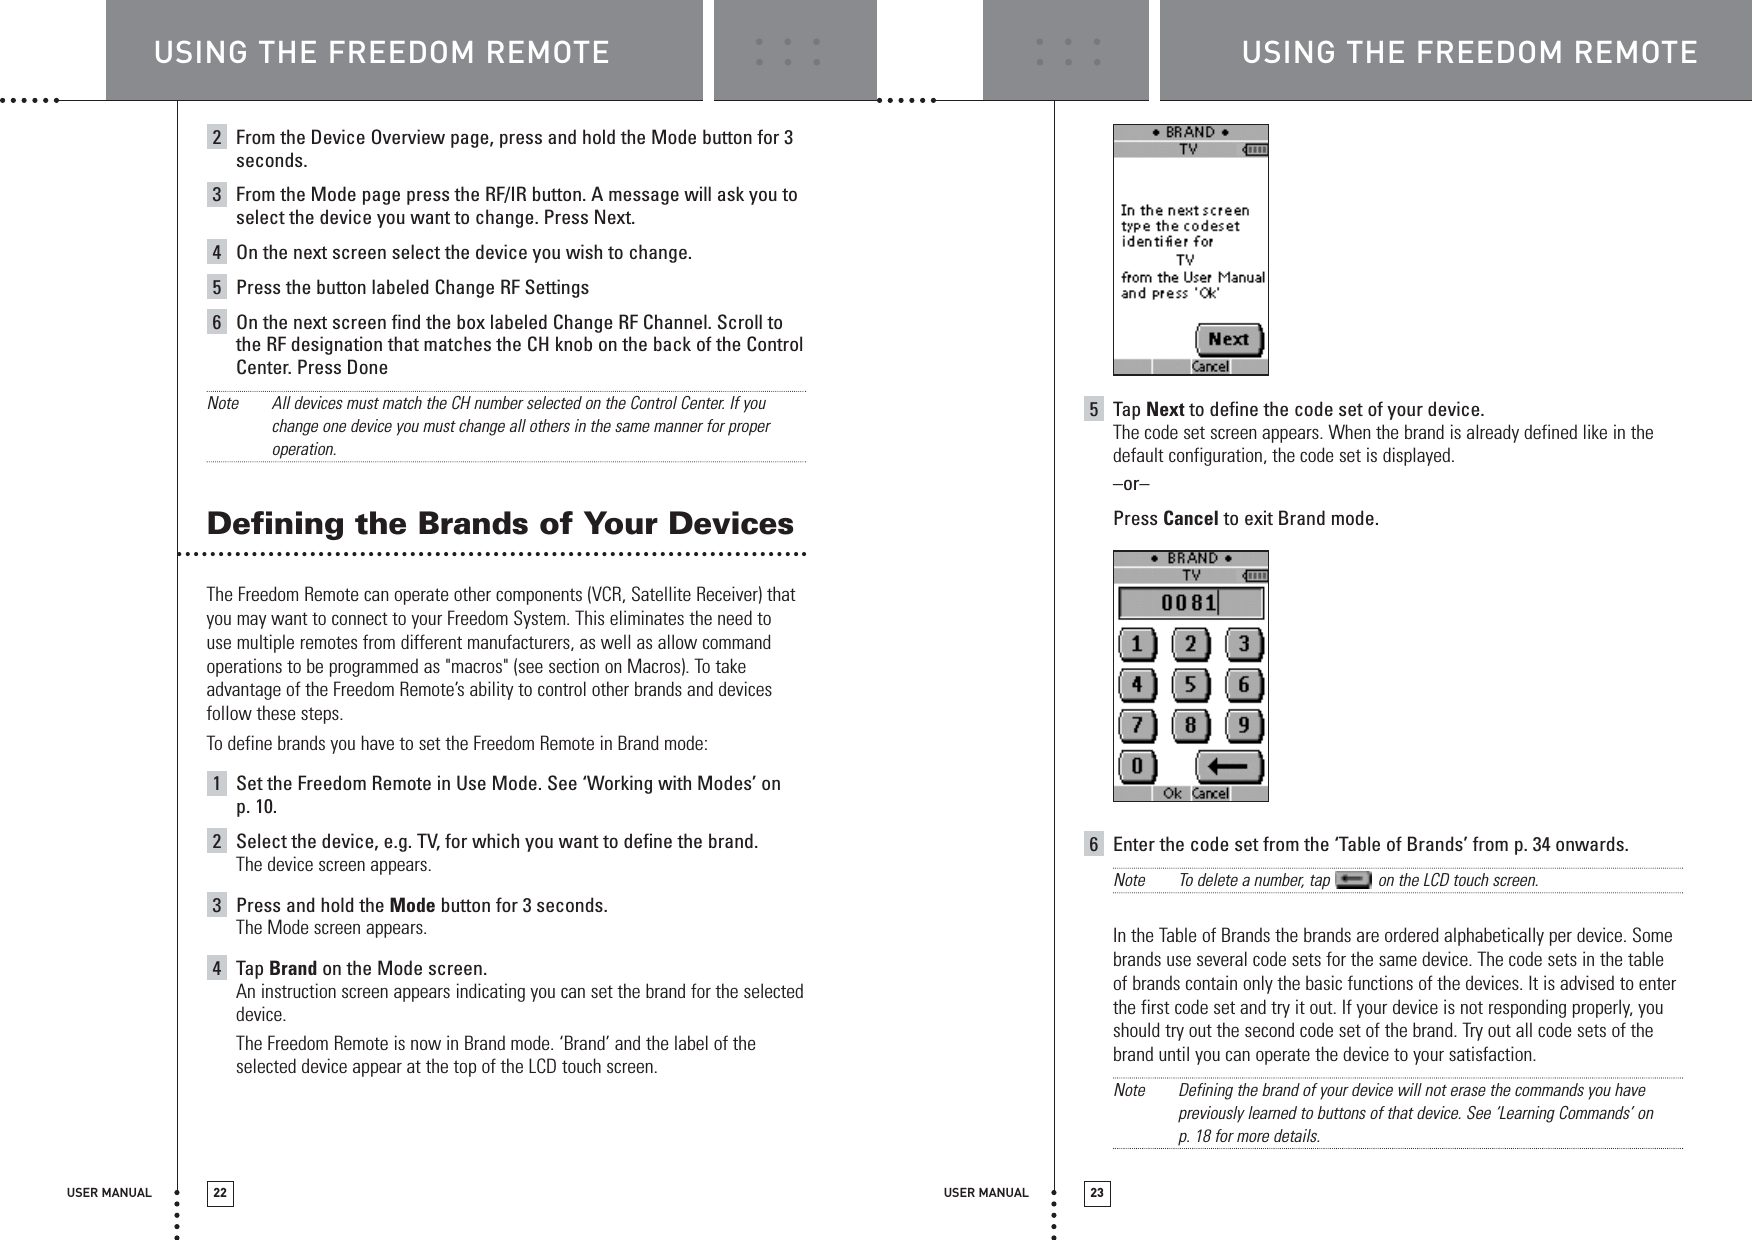 USER MANUAL 23USER MANUAL 222From the Device Overview page, press and hold the Mode button for 3seconds.3From the Mode page press the RF/IR button. A message will ask you toselect the device you want to change. Press Next.4On the next screen select the device you wish to change. 5Press the button labeled Change RF Settings6On the next screen find the box labeled Change RF Channel. Scroll tothe RF designation that matches the CH knob on the back of the ControlCenter. Press DoneNote All devices must match the CH number selected on the Control Center. If youchange one device you must change all others in the same manner for properoperation.Defining the Brands of Your Devices The Freedom Remote can operate other components (VCR, Satellite Receiver) thatyou may want to connect to your Freedom System. This eliminates the need to use multiple remotes from different manufacturers, as well as allow commandoperations to be programmed as &quot;macros&quot; (see section on Macros). To takeadvantage of the Freedom Remote’s ability to control other brands and devicesfollow these steps.To define brands you have to set the Freedom Remote in Brand mode:1Set the Freedom Remote in Use Mode. See ‘Working with Modes’ on p. 10.2Select the device, e.g. TV, for which you want to define the brand.The device screen appears.3Press and hold the Mode button for 3 seconds.The Mode screen appears.4Tap Brand on the Mode screen.An instruction screen appears indicating you can set the brand for the selecteddevice.The Freedom Remote is now in Brand mode. ‘Brand’ and the label of theselected device appear at the top of the LCD touch screen.5Tap Next to define the code set of your device.The code set screen appears. When the brand is already defined like in thedefault configuration, the code set is displayed.–or–Press Cancel to exit Brand mode.6Enter the code set from the ‘Table of Brands’ from p. 34 onwards.Note To delete a number, tap  on the LCD touch screen.In the Table of Brands the brands are ordered alphabetically per device. Somebrands use several code sets for the same device. The code sets in the tableof brands contain only the basic functions of the devices. It is advised to enterthe first code set and try it out. If your device is not responding properly, youshould try out the second code set of the brand. Try out all code sets of thebrand until you can operate the device to your satisfaction.Note Defining the brand of your device will not erase the commands you havepreviously learned to buttons of that device. See ‘Learning Commands’ on p. 18 for more details.USING THE FREEDOM REMOTE USING THE FREEDOM REMOTE